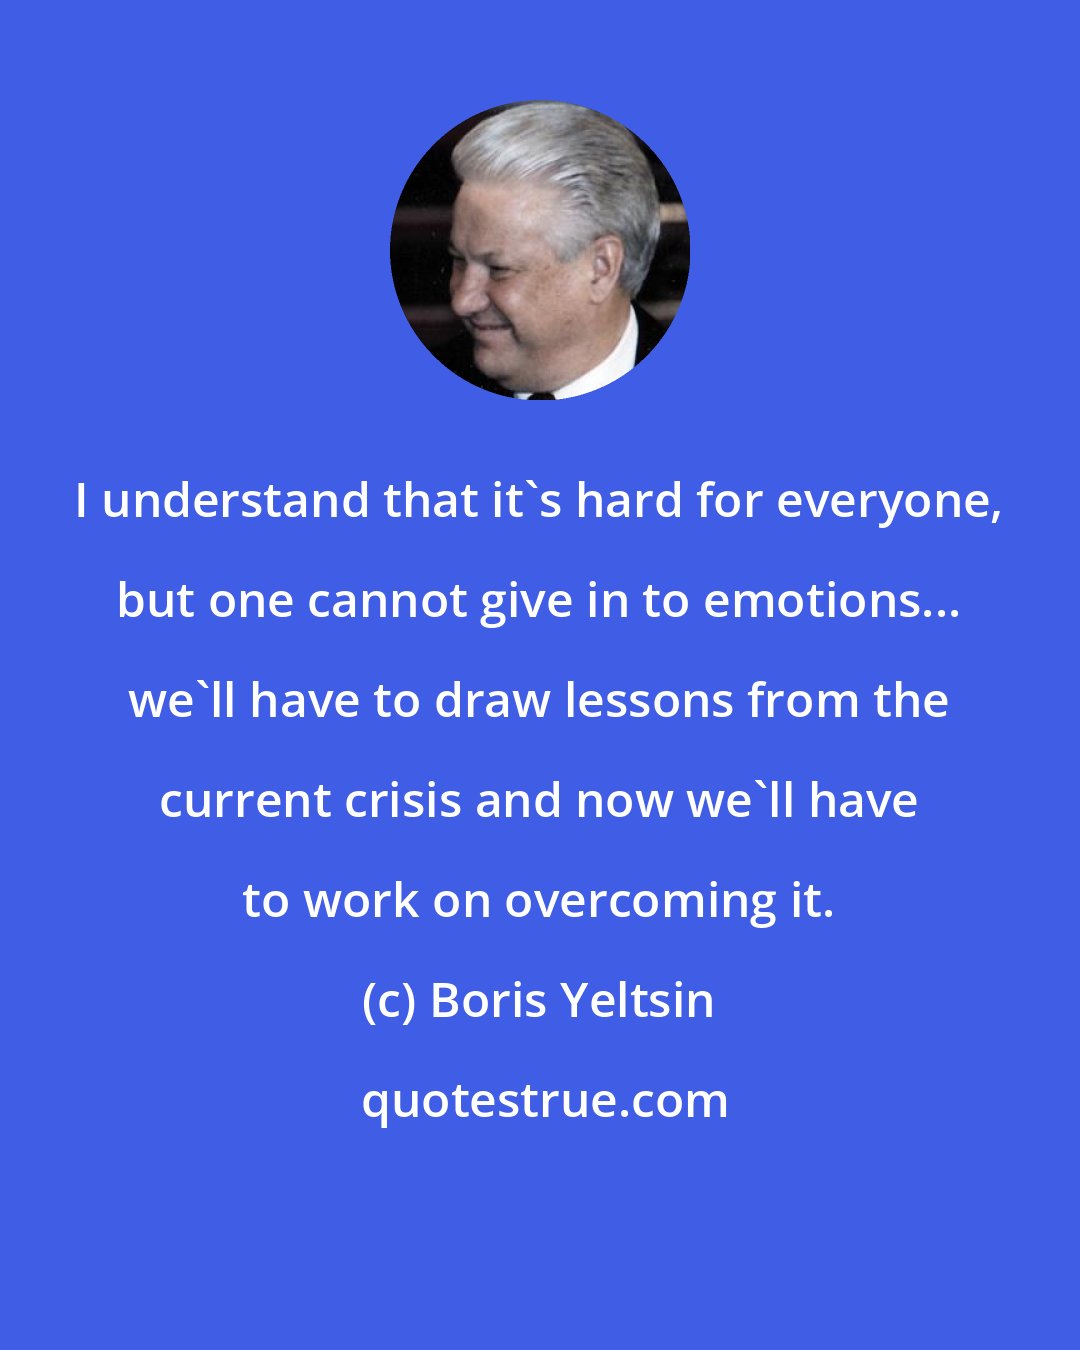 Boris Yeltsin: I understand that it's hard for everyone, but one cannot give in to emotions... we'll have to draw lessons from the current crisis and now we'll have to work on overcoming it.